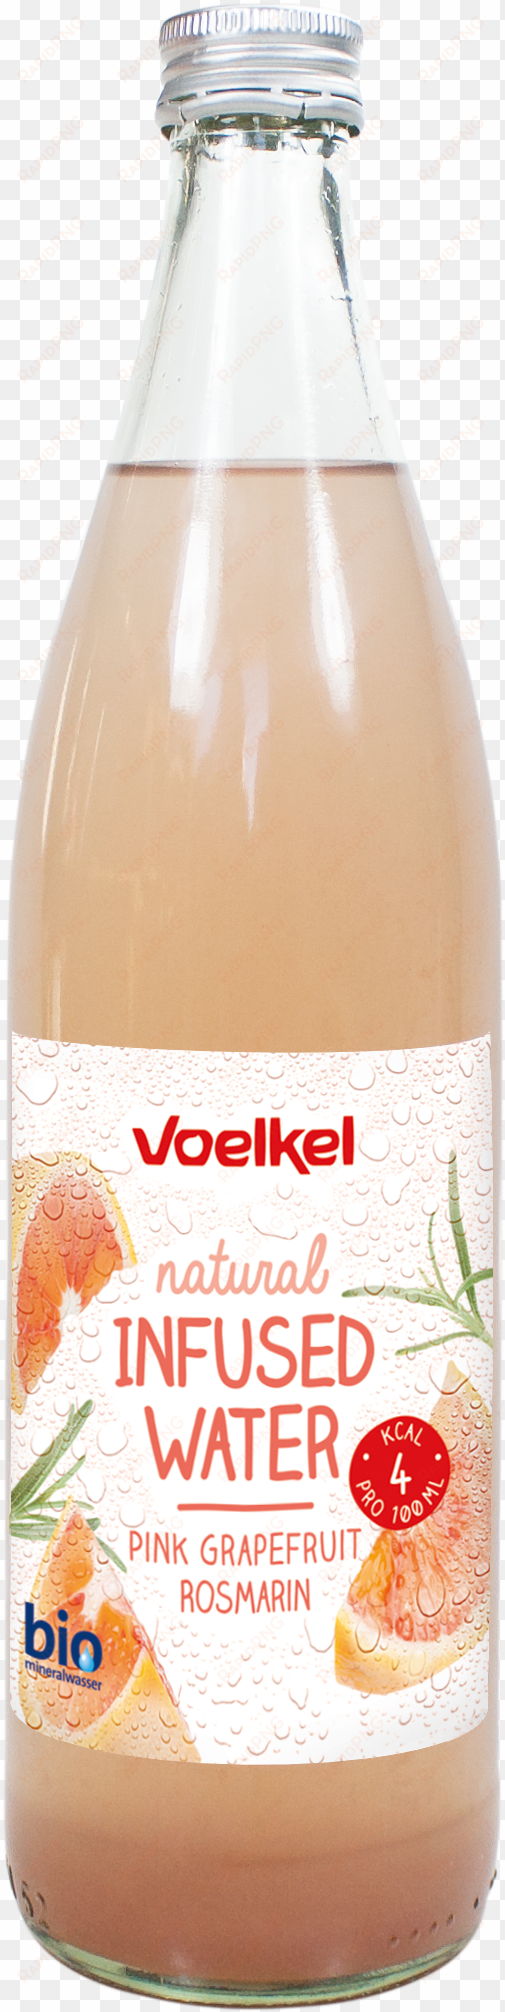 we take responsibility for people and nature - voelkel bio infused water orange ingwer, 0,5 l